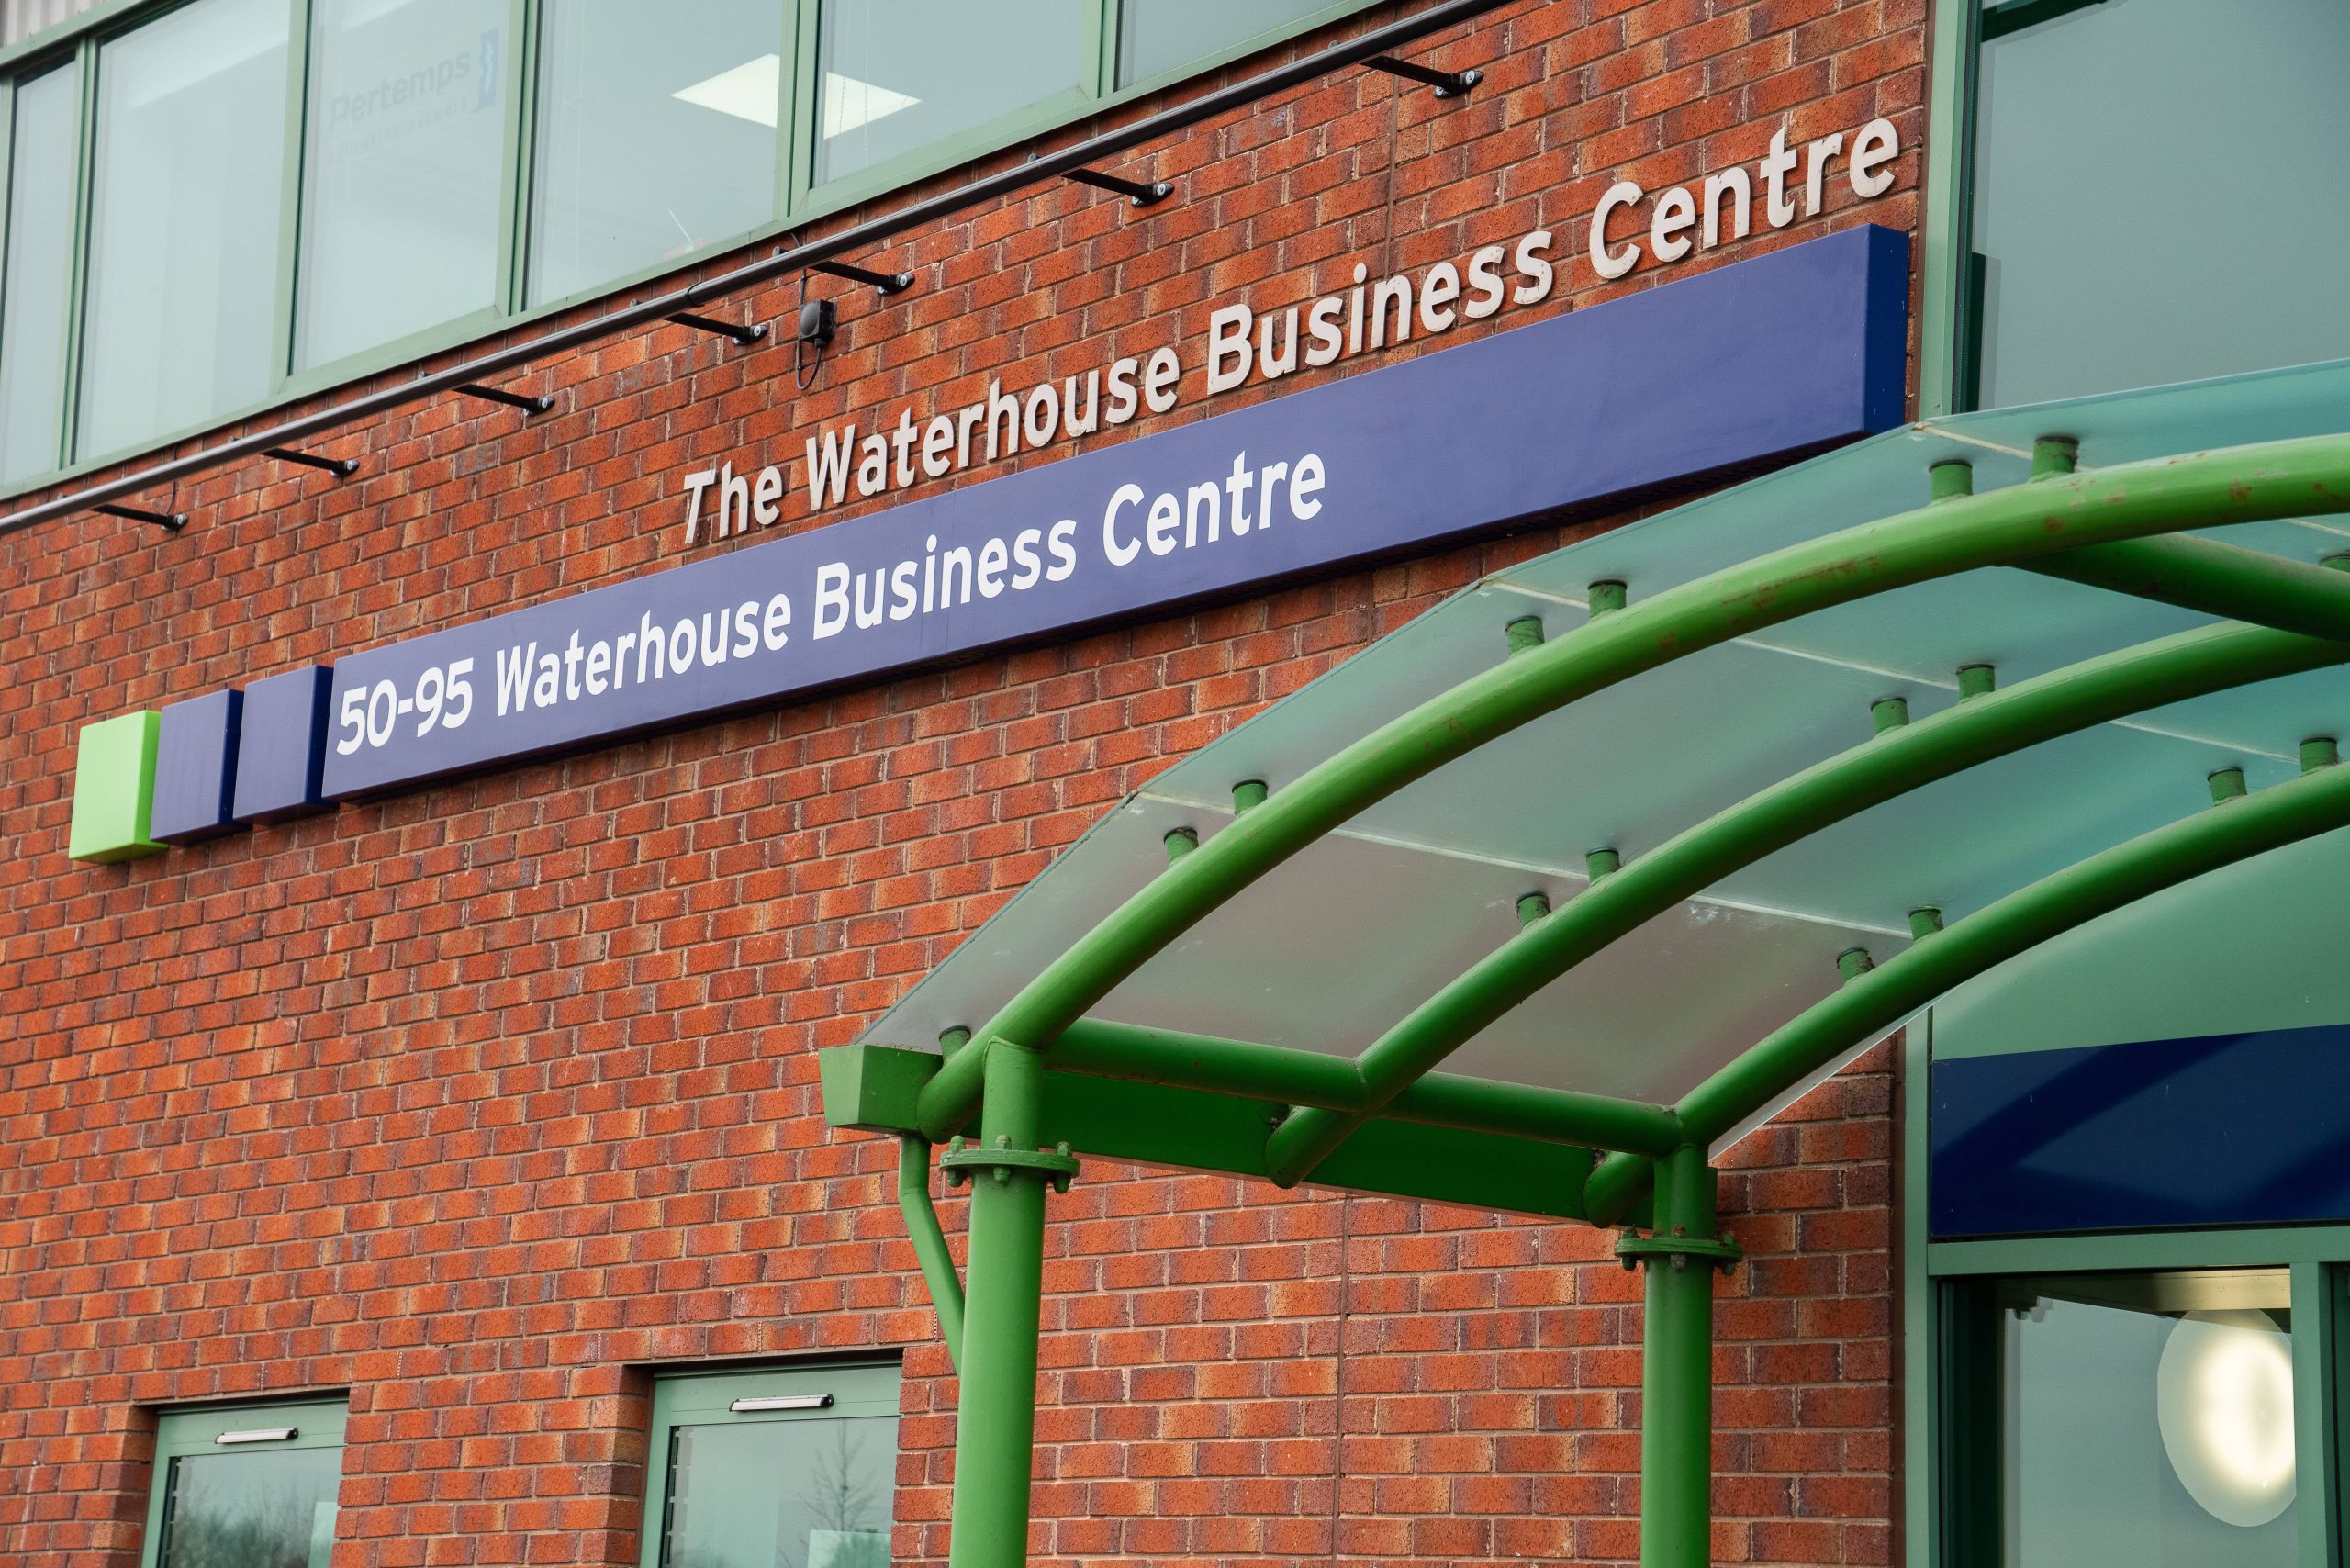 Entrance sign to Waterhouse Business Centre